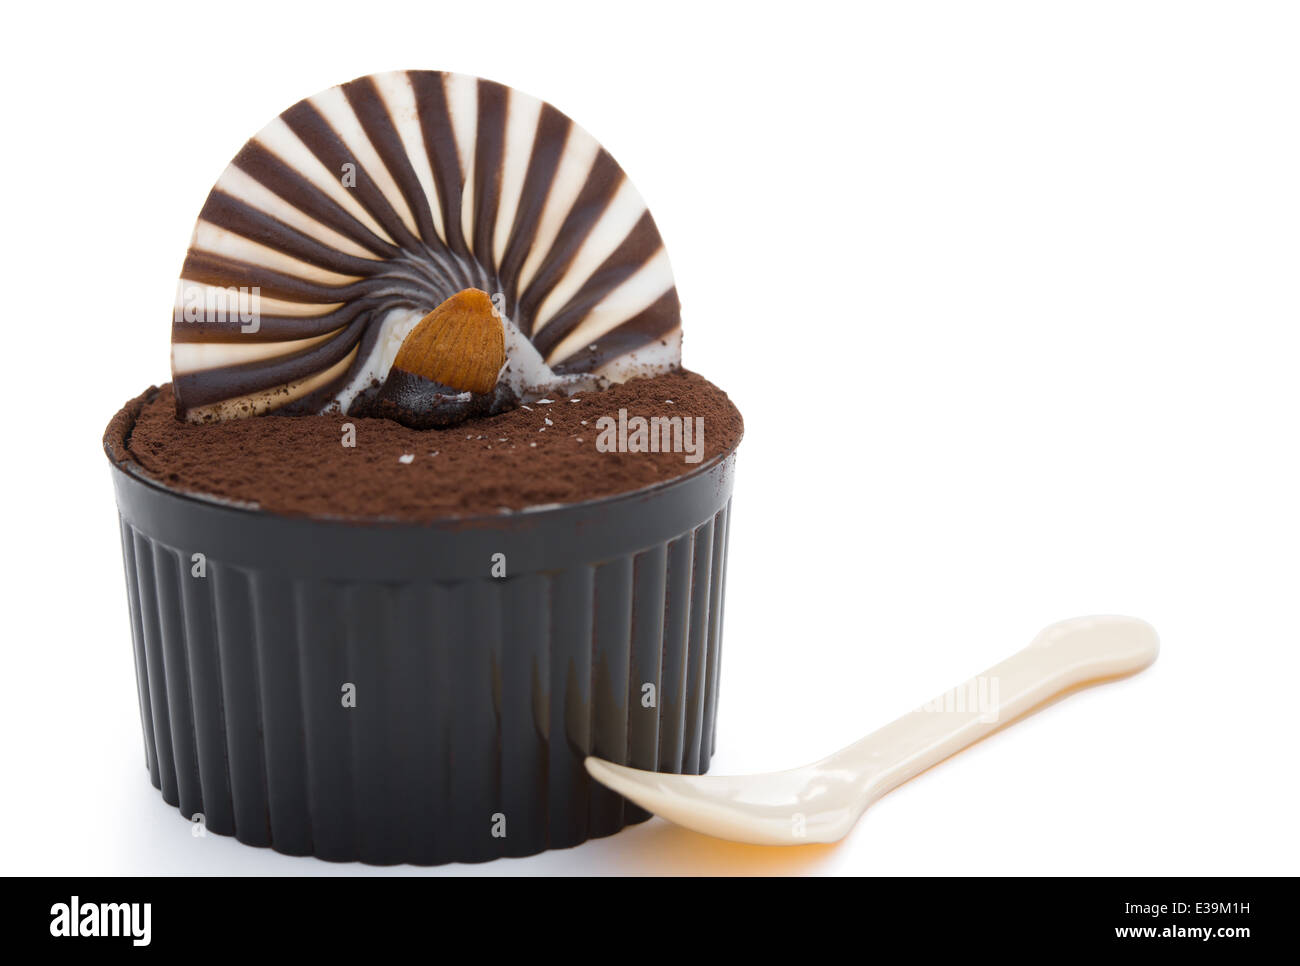 brown cup cake with chocolate and nut with clipping path Stock Photo